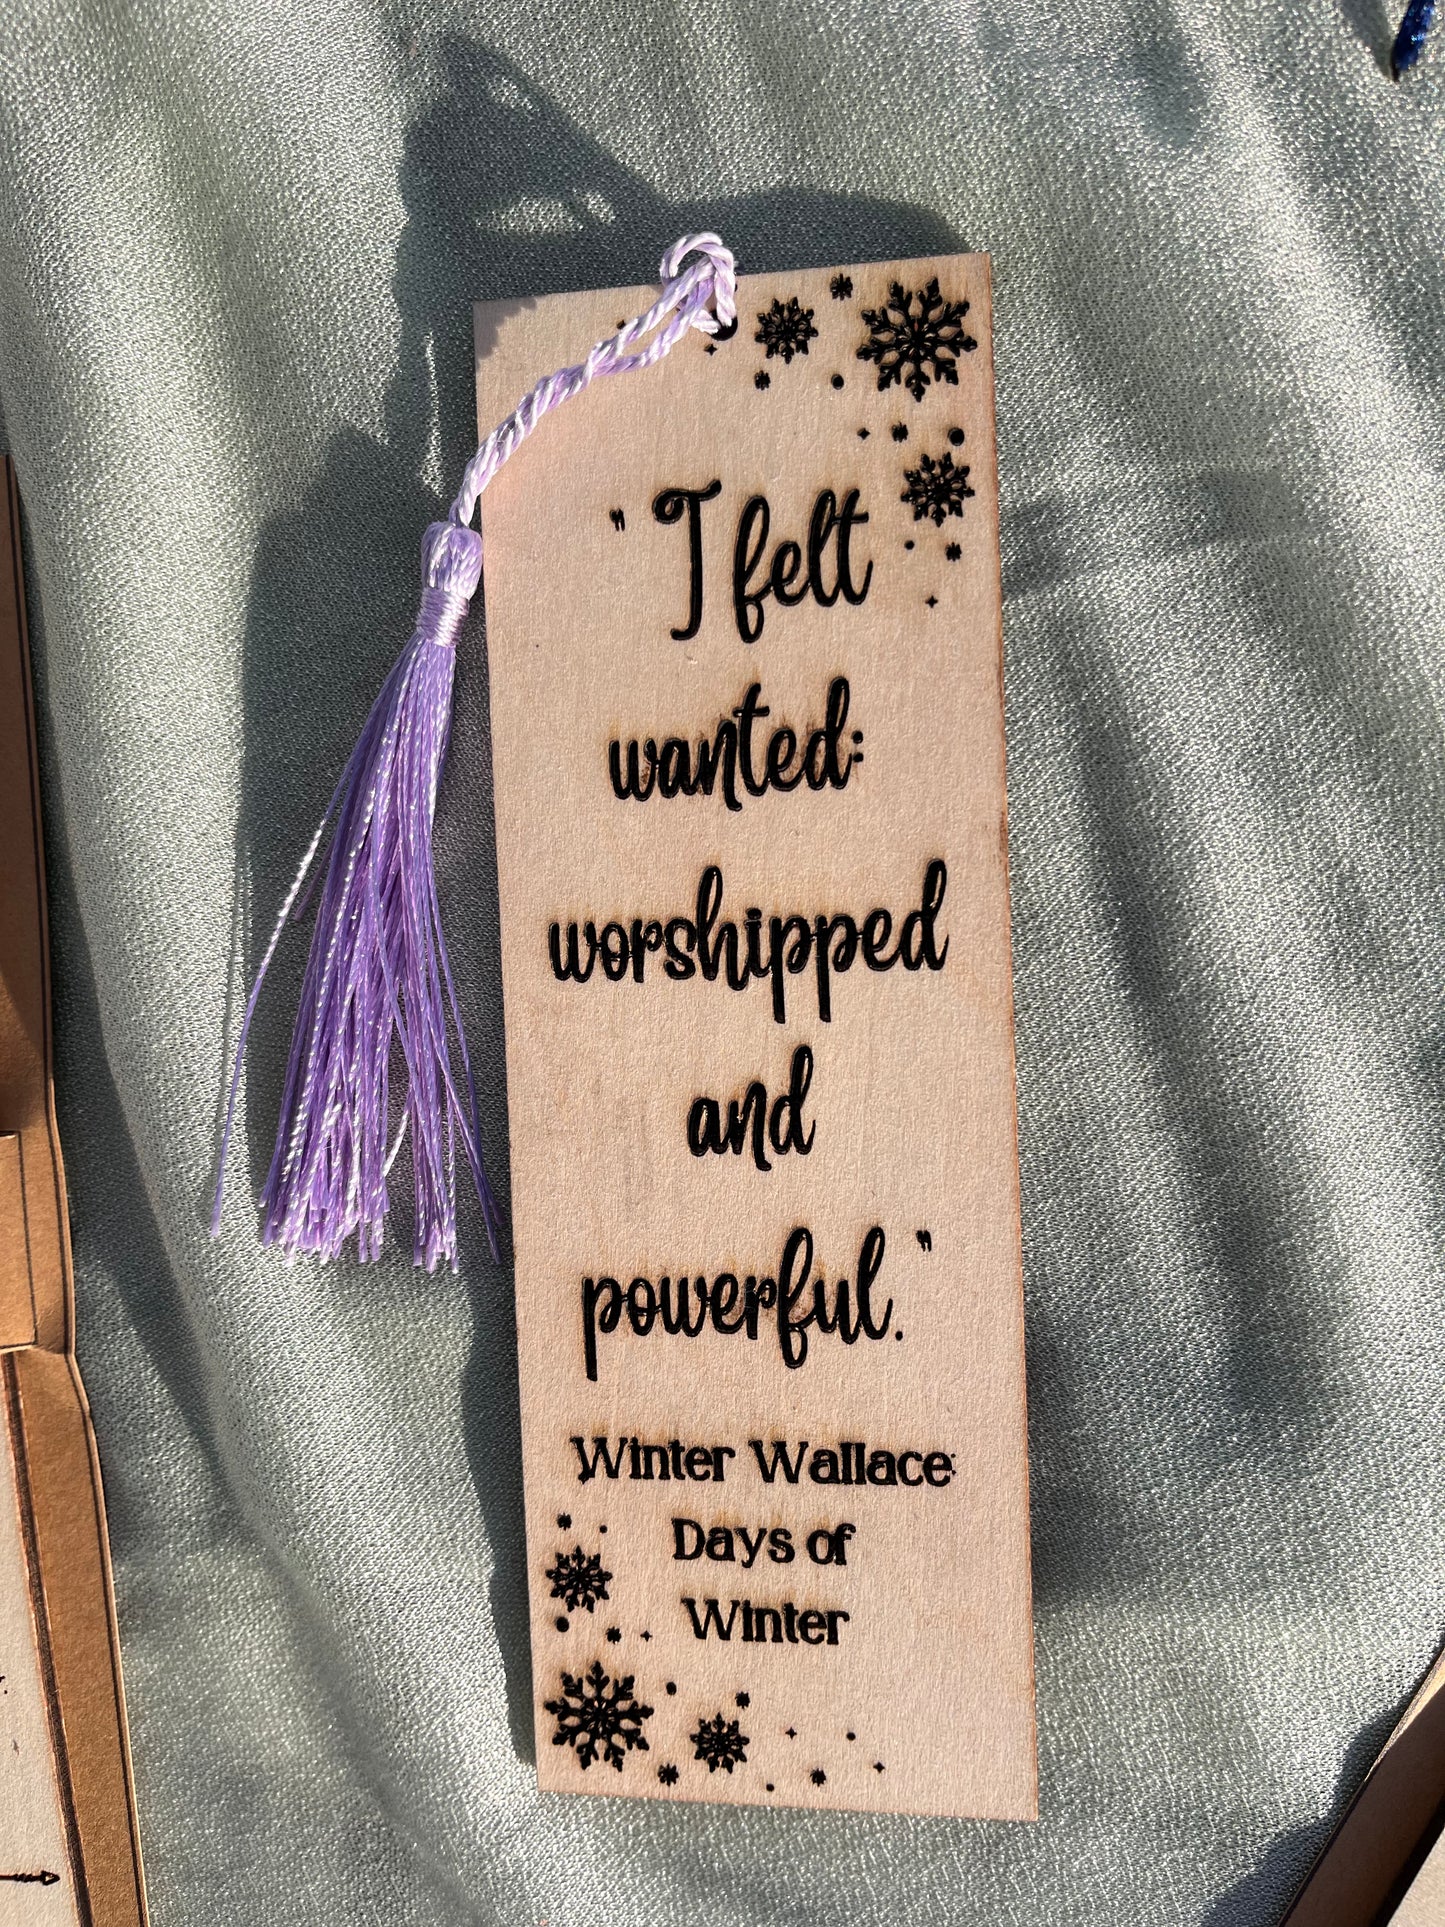 Days of Winter Wooden Bookmarks